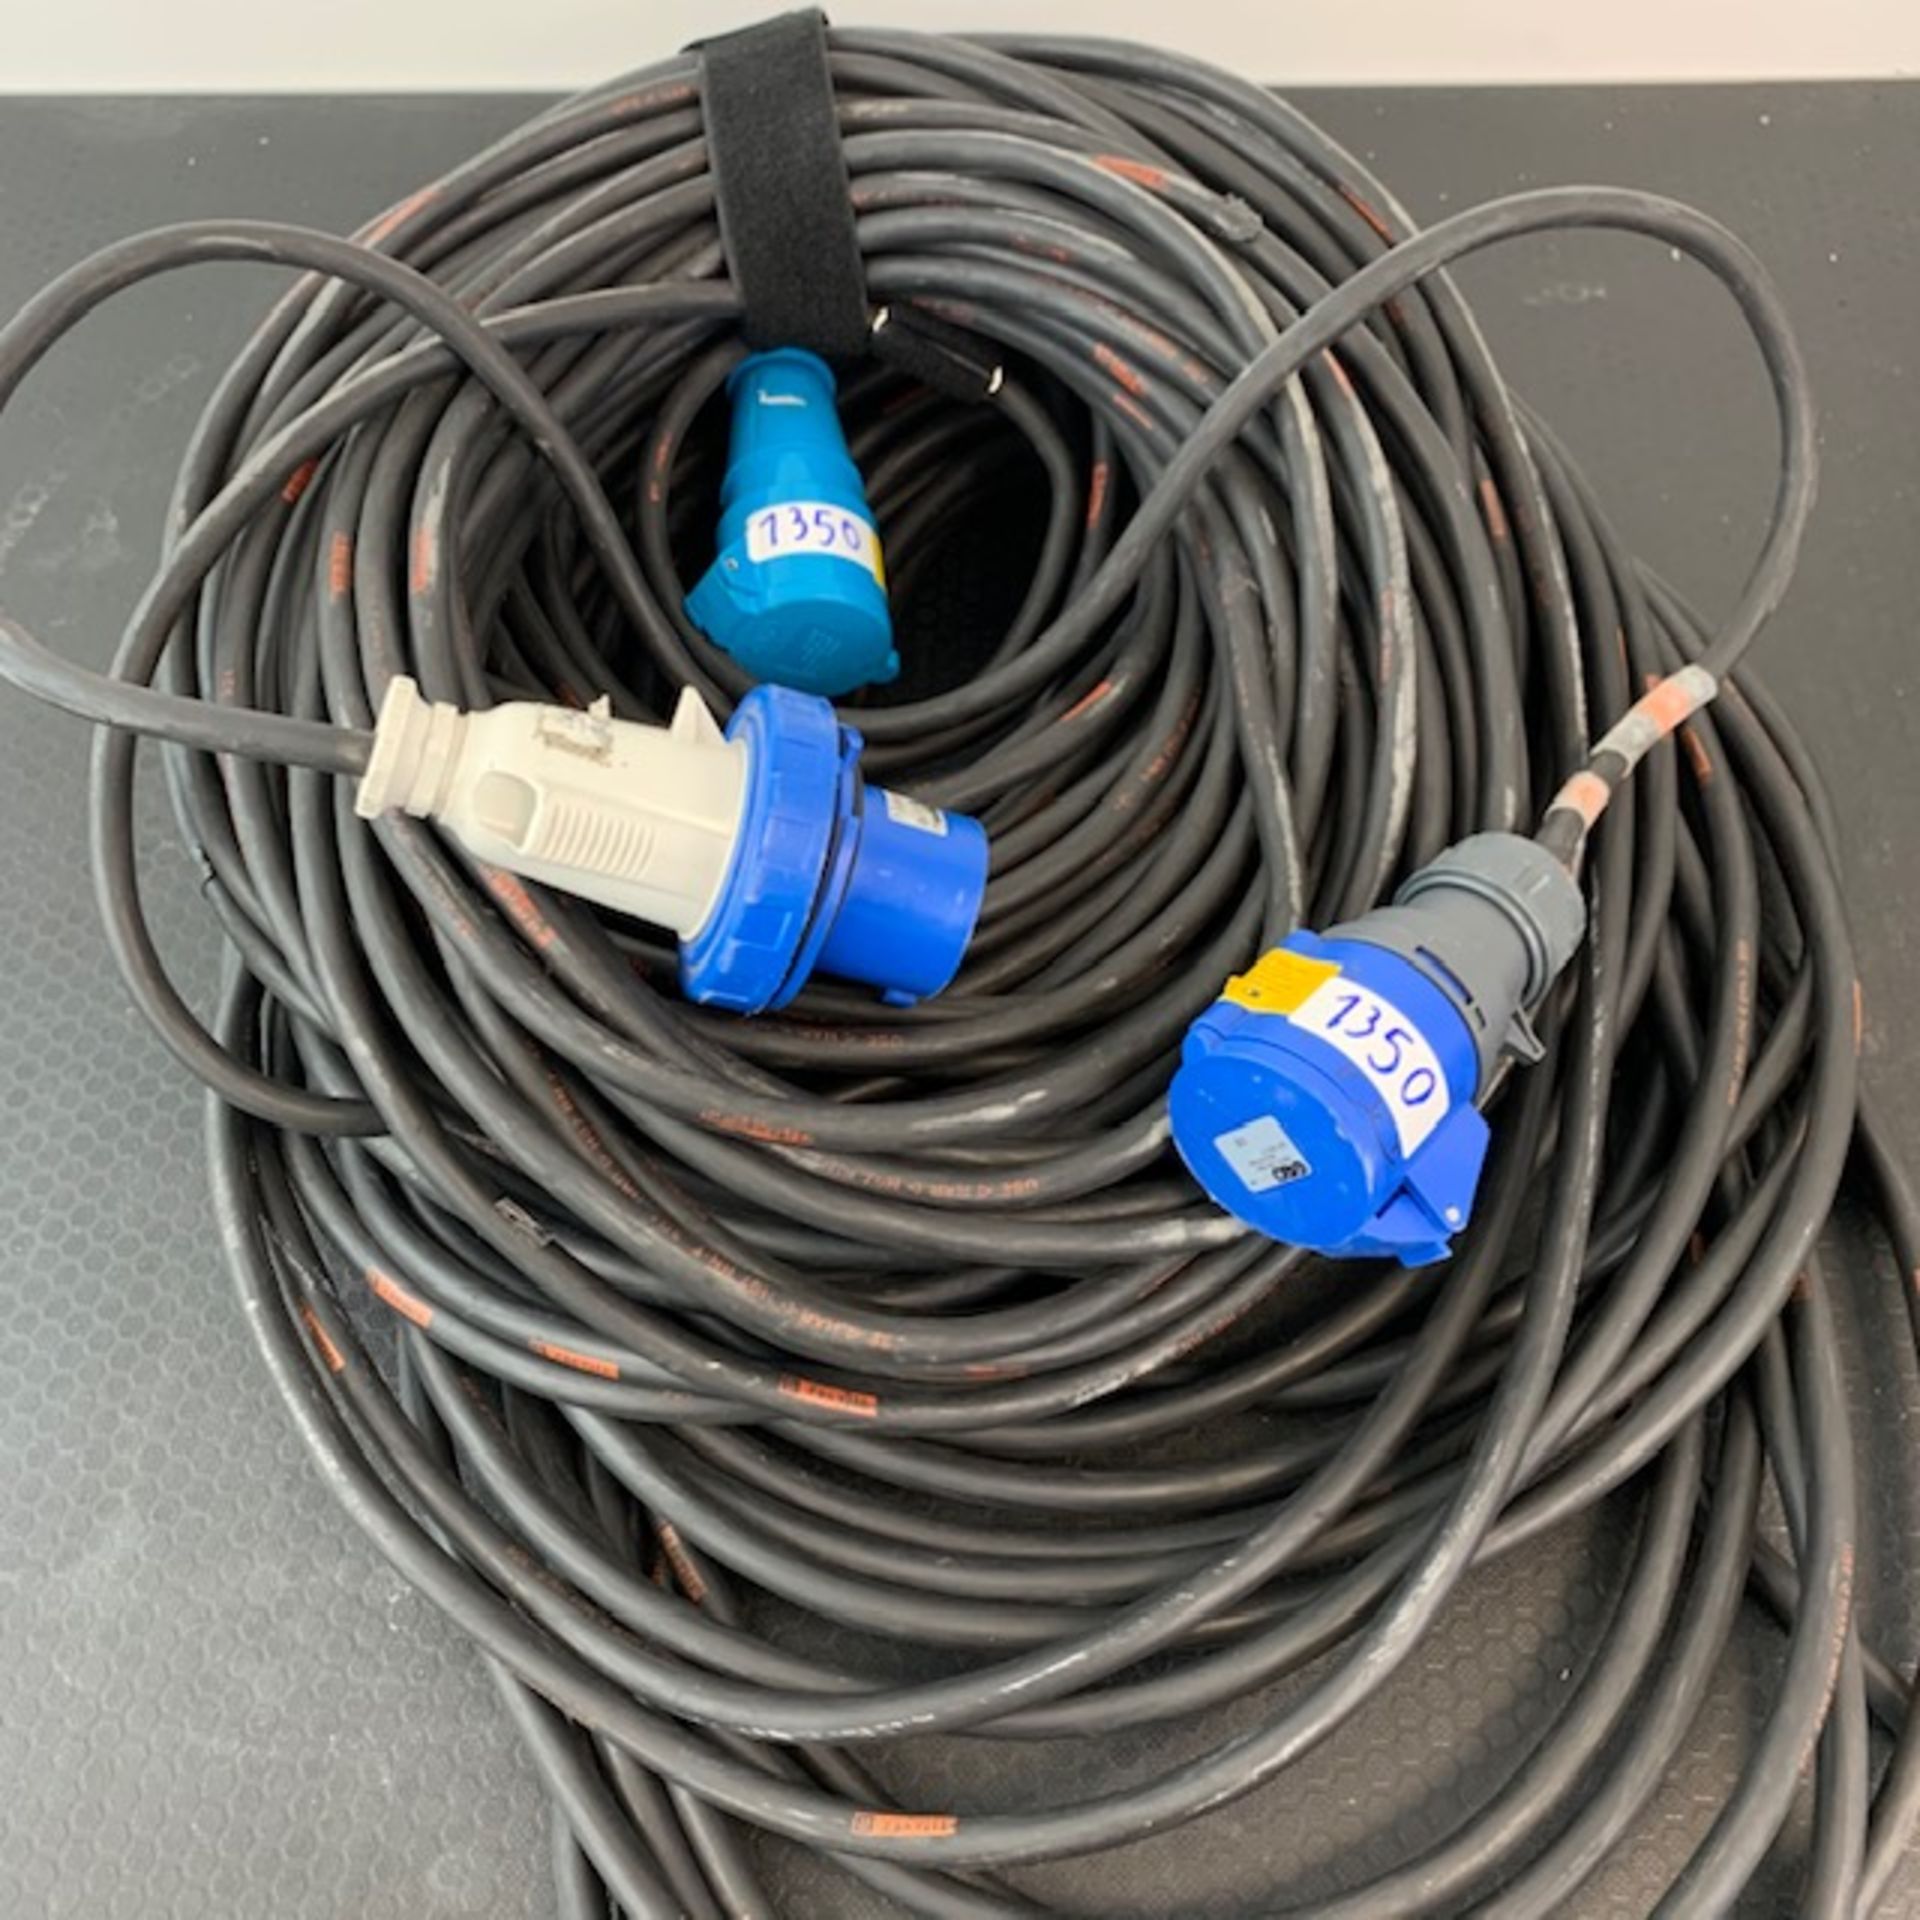 2 X 32Amp Single Phase 30M Cable - Ref: 1350 - CL581 - Location: Altrincham WA14Items will be